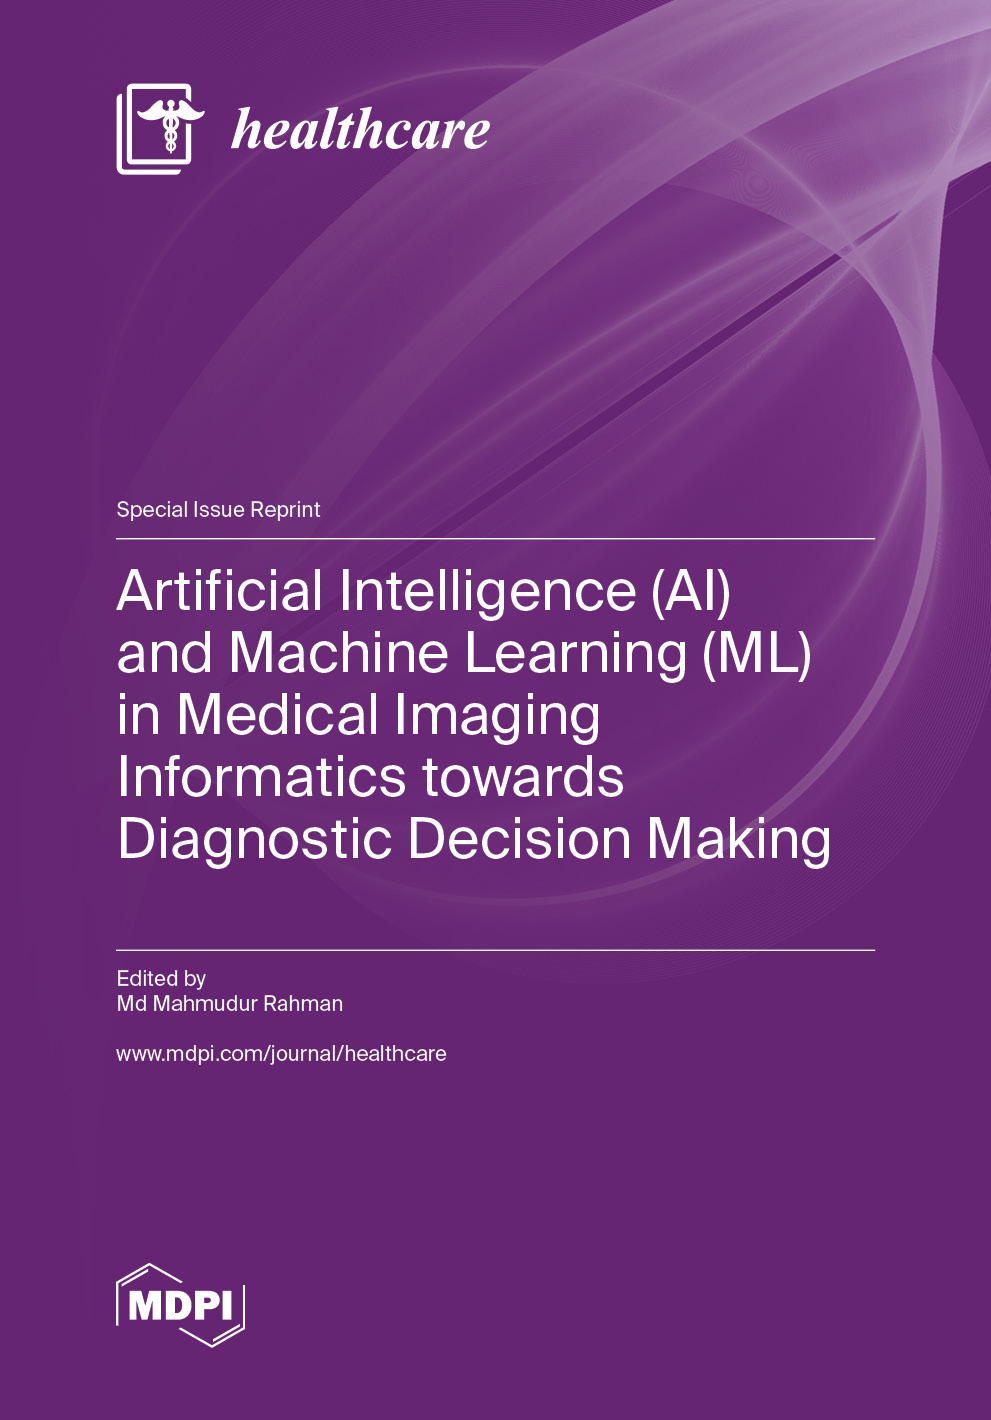 Artificial Intelligence (AI) and Machine Learning (ML) in Medical Imaging Informatics towards Diagnostic Decision Making